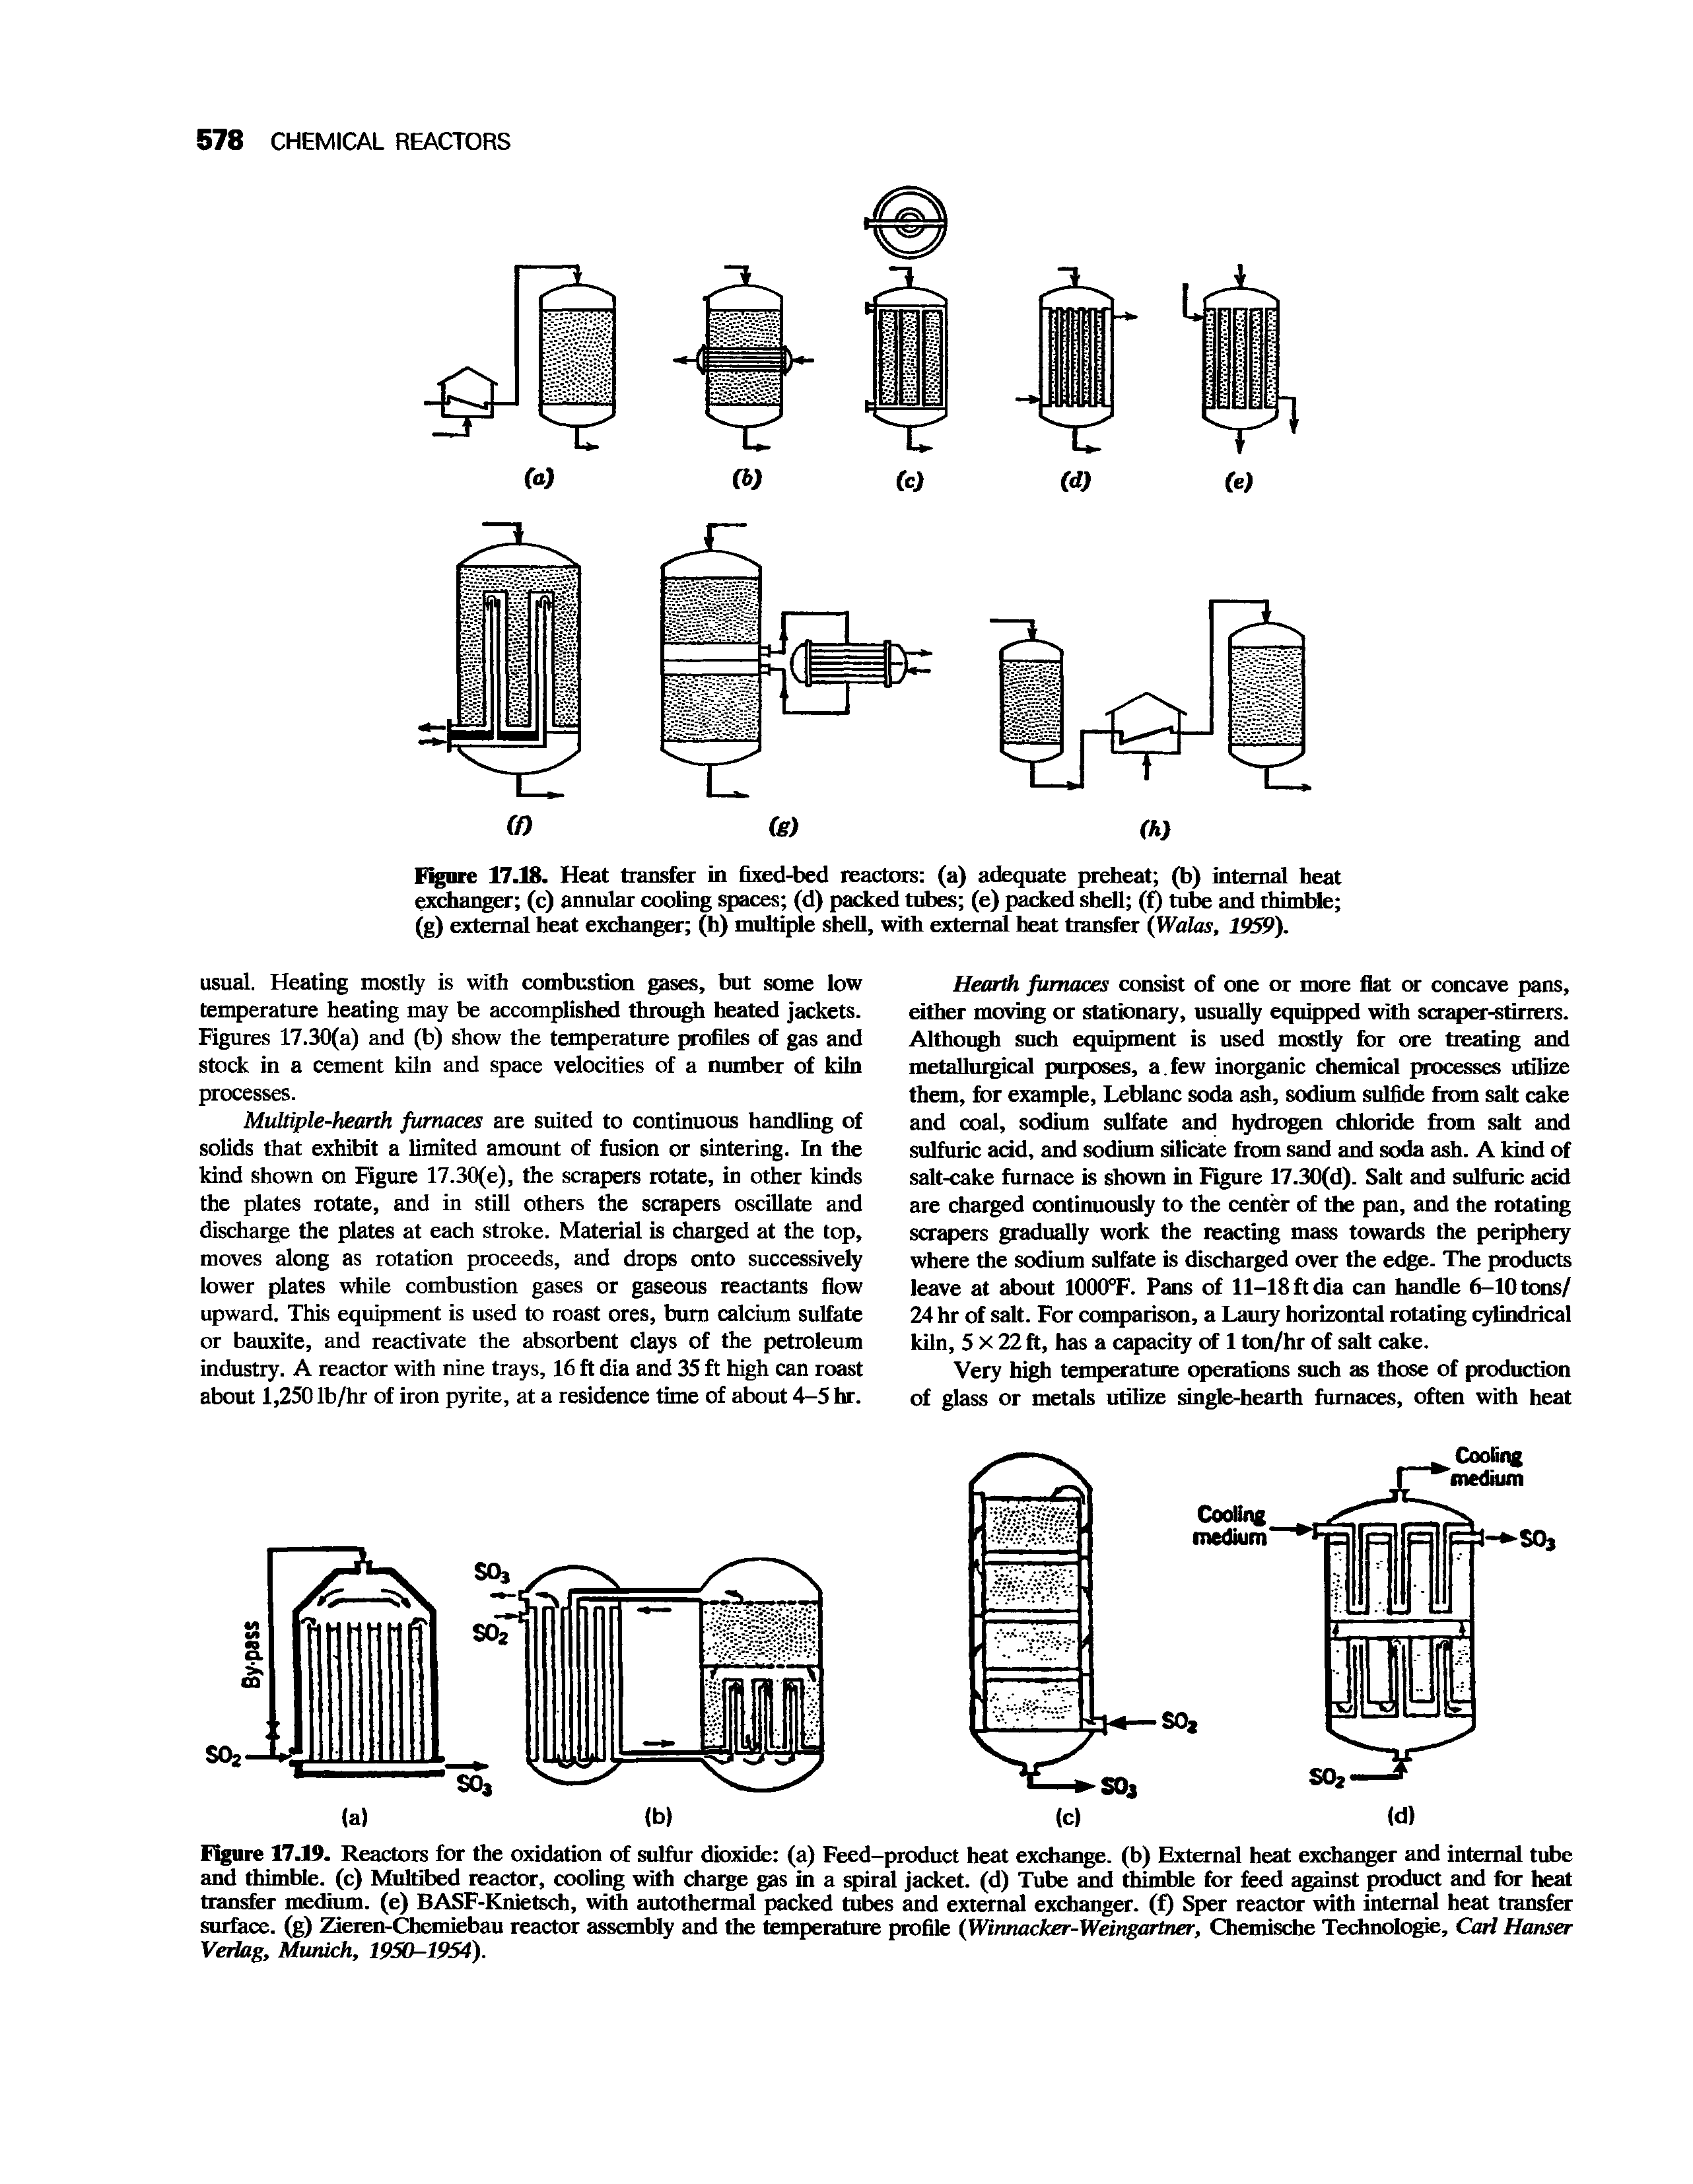 Figure 17.19. Reactors for the oxidation of sulfur dioxide (a) Feed-product heat exchange, (b) External heat exchanger and internal tube and thimble, (c) Multibed reactor, cooling with charge gas in a spiral jacket, (d) Tube and thimble for feed against product and for heat transfer medium, (e) BASF-Knietsch, with autothermal packed tubes and external exchanger, (f) Sper reactor with internal heat transfer surface, (g) Zieren-Chemiebau reactor assembly and the temperature profile (Winnacker- Weingartner, Chemische Technologie, Carl Hanser Verlag, Munich, 1950-1954).